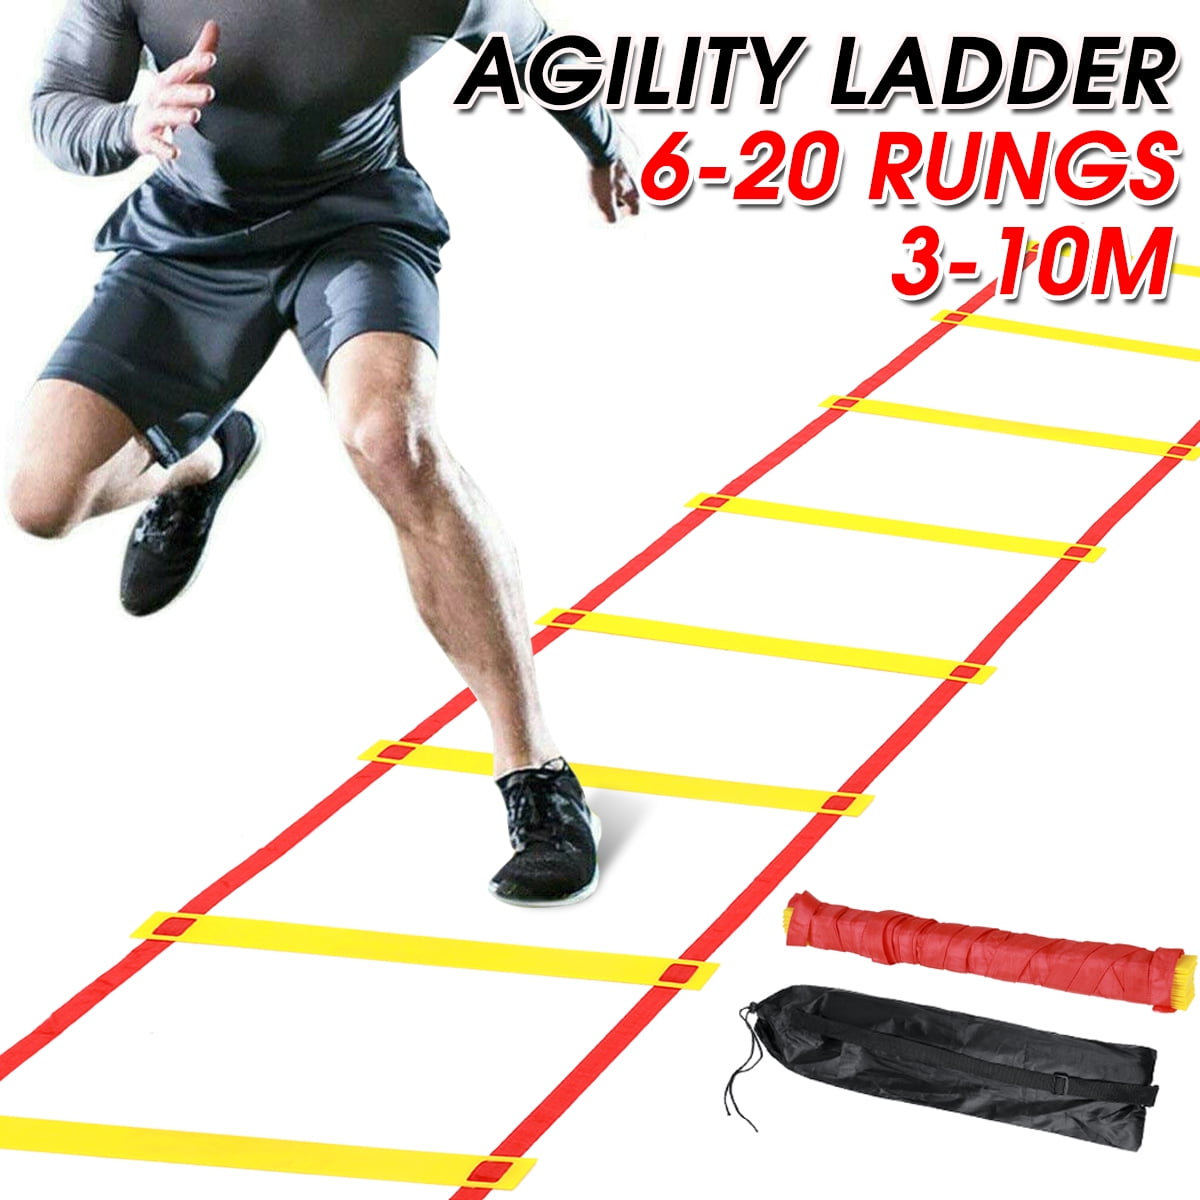 Details about   12 Rungs Speed Agility Ladder Soccer Football Sports Training Exercise Equipment 